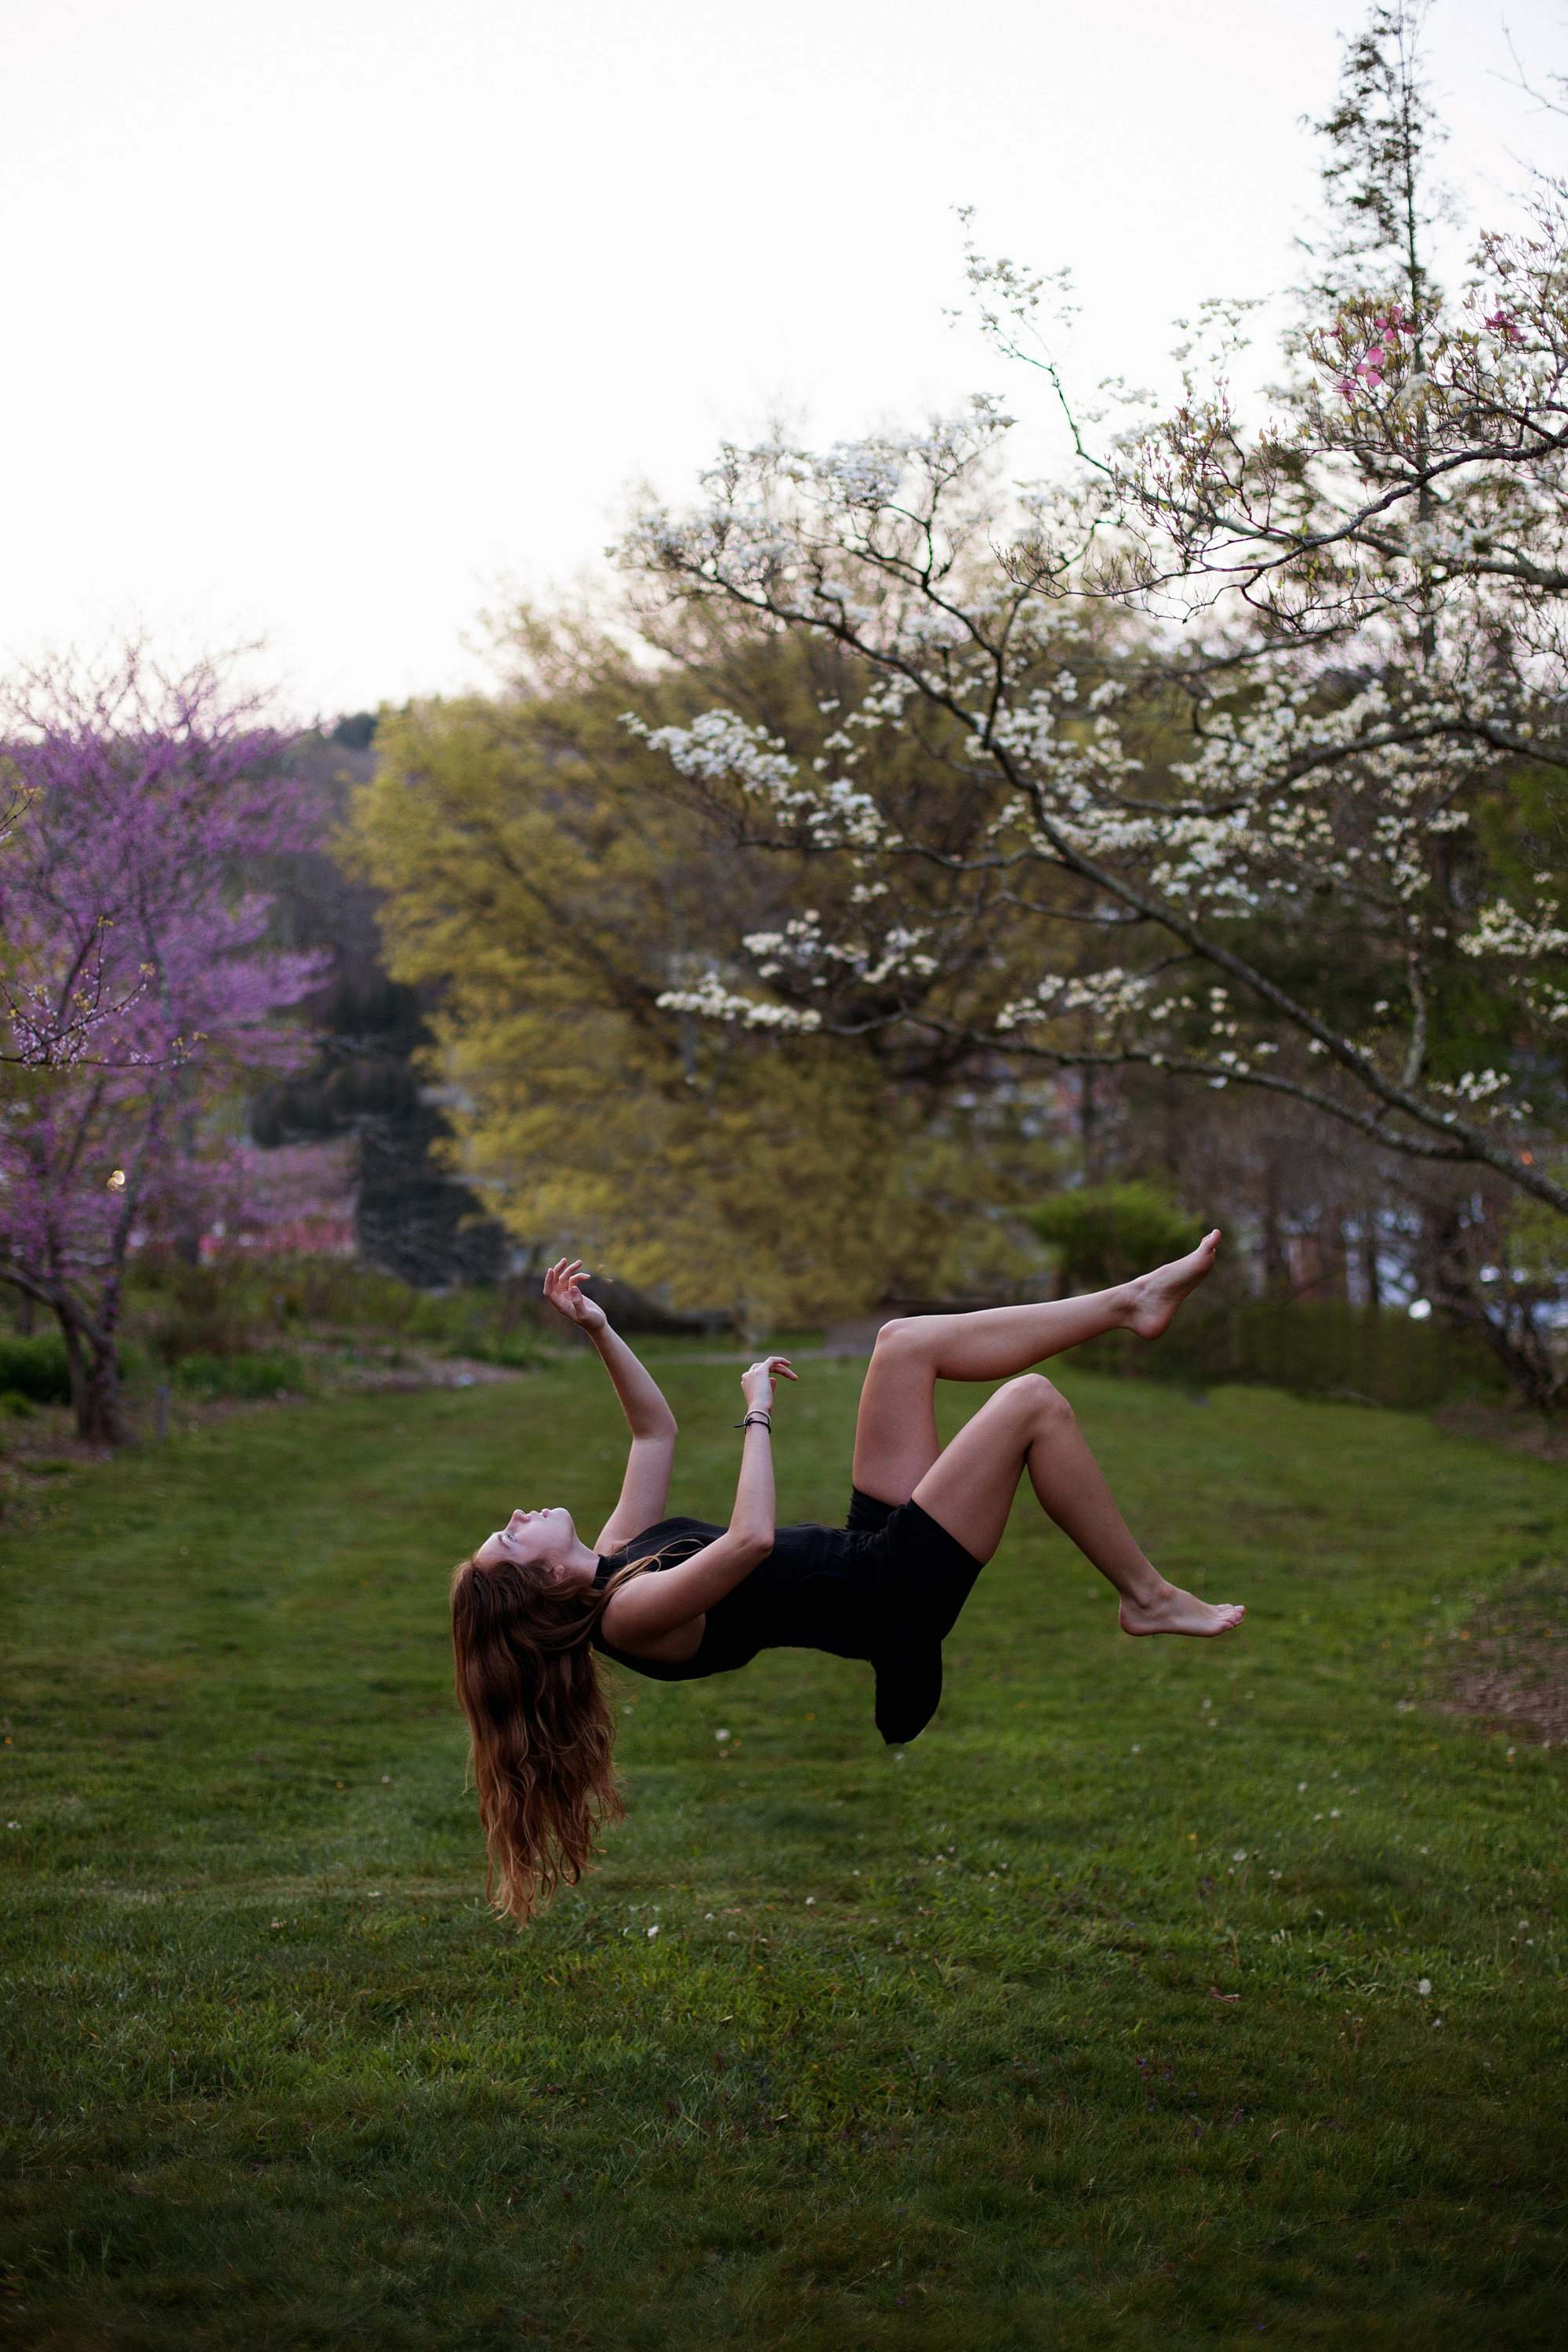 Girl Woman Back Flipping In The Garden Spring Image Free